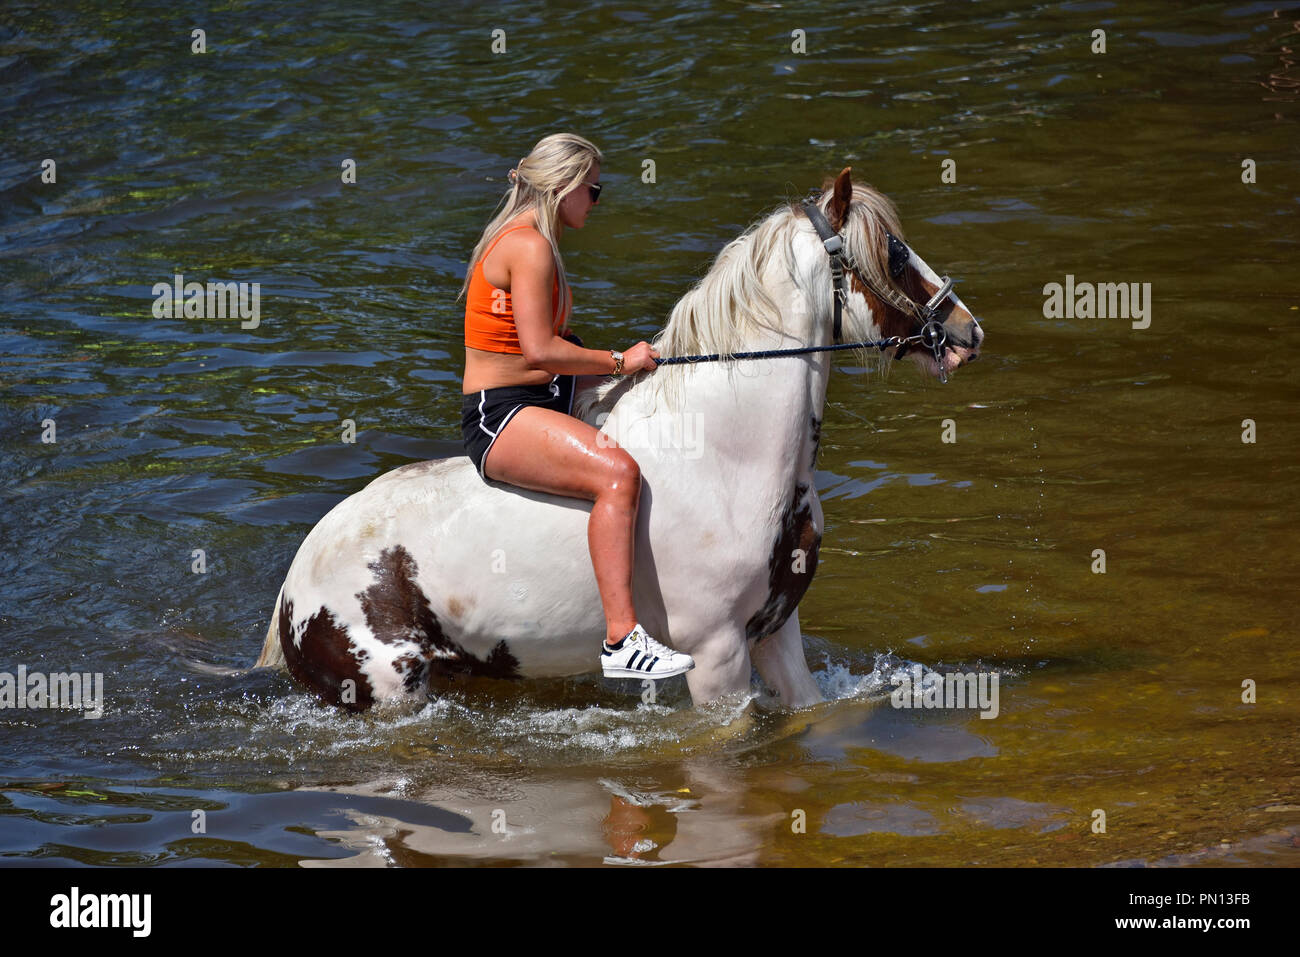 Gypsy Traveller girl riding horse in River Eden. Appleby Horse Fair 2018. Appleby-in-Westmorland, Cumbria, England, United Kingdom, Europe. Stock Photo